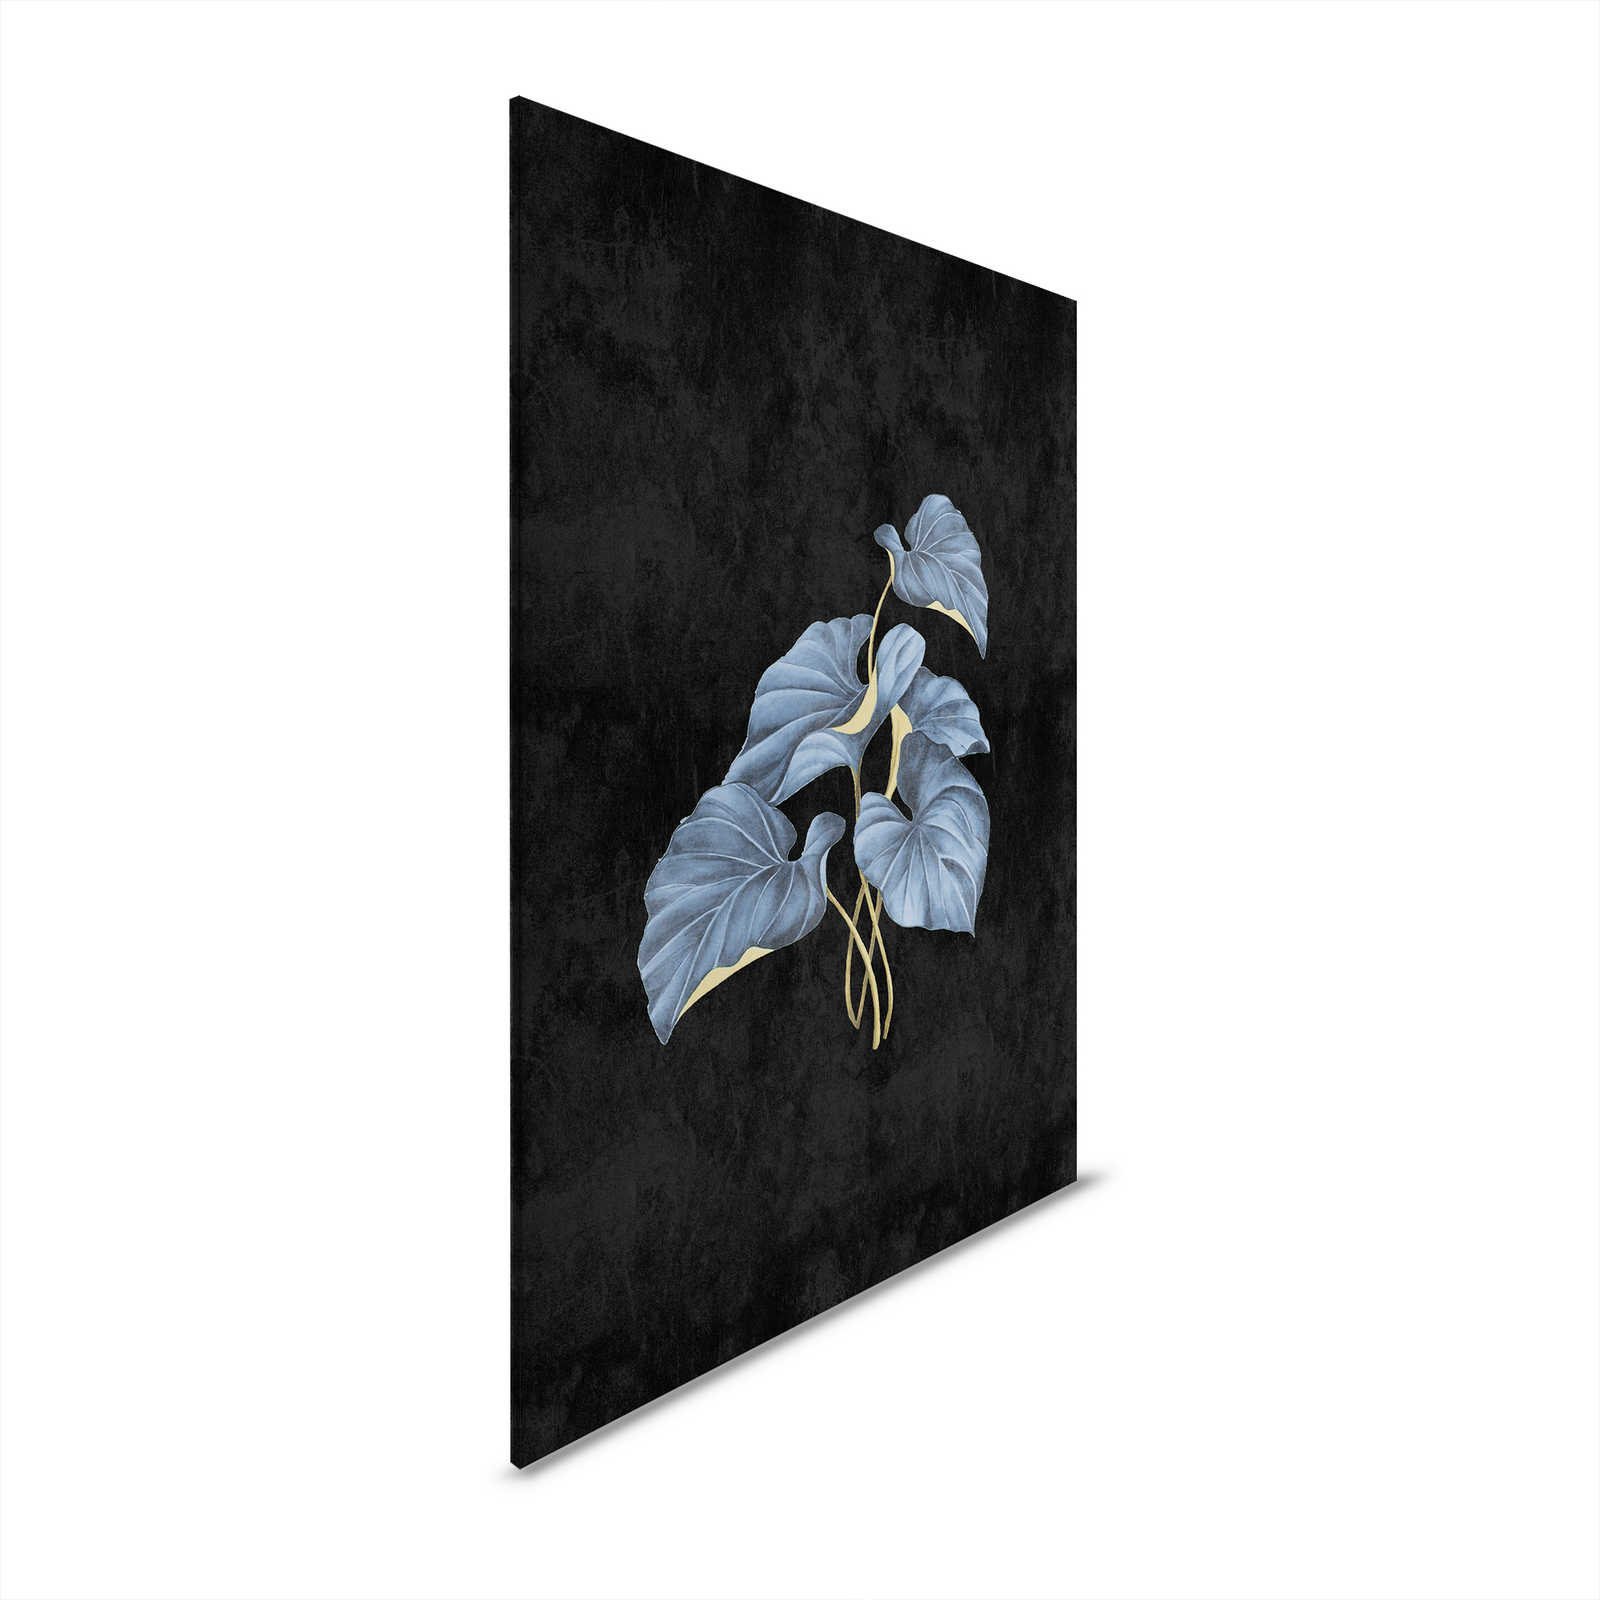 Fiji 1 - Black Canvas Painting Blue Leaves with Gold Accent - 0.80 m x 1.20 m
